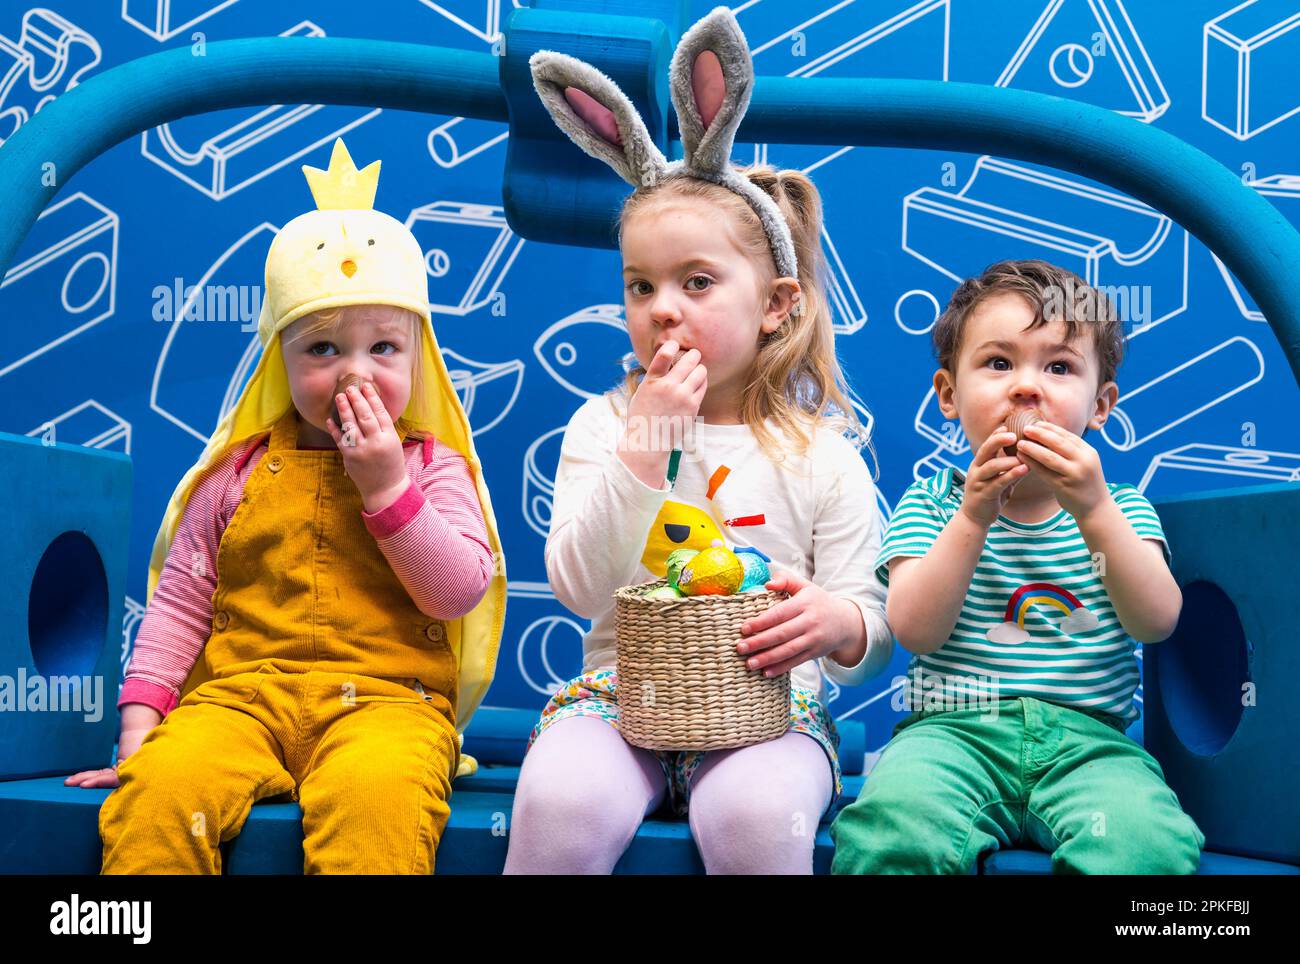 Three young children eating chocolate Easter eggs at Edinburgh Science Festival, Scotland, UK Stock Photo